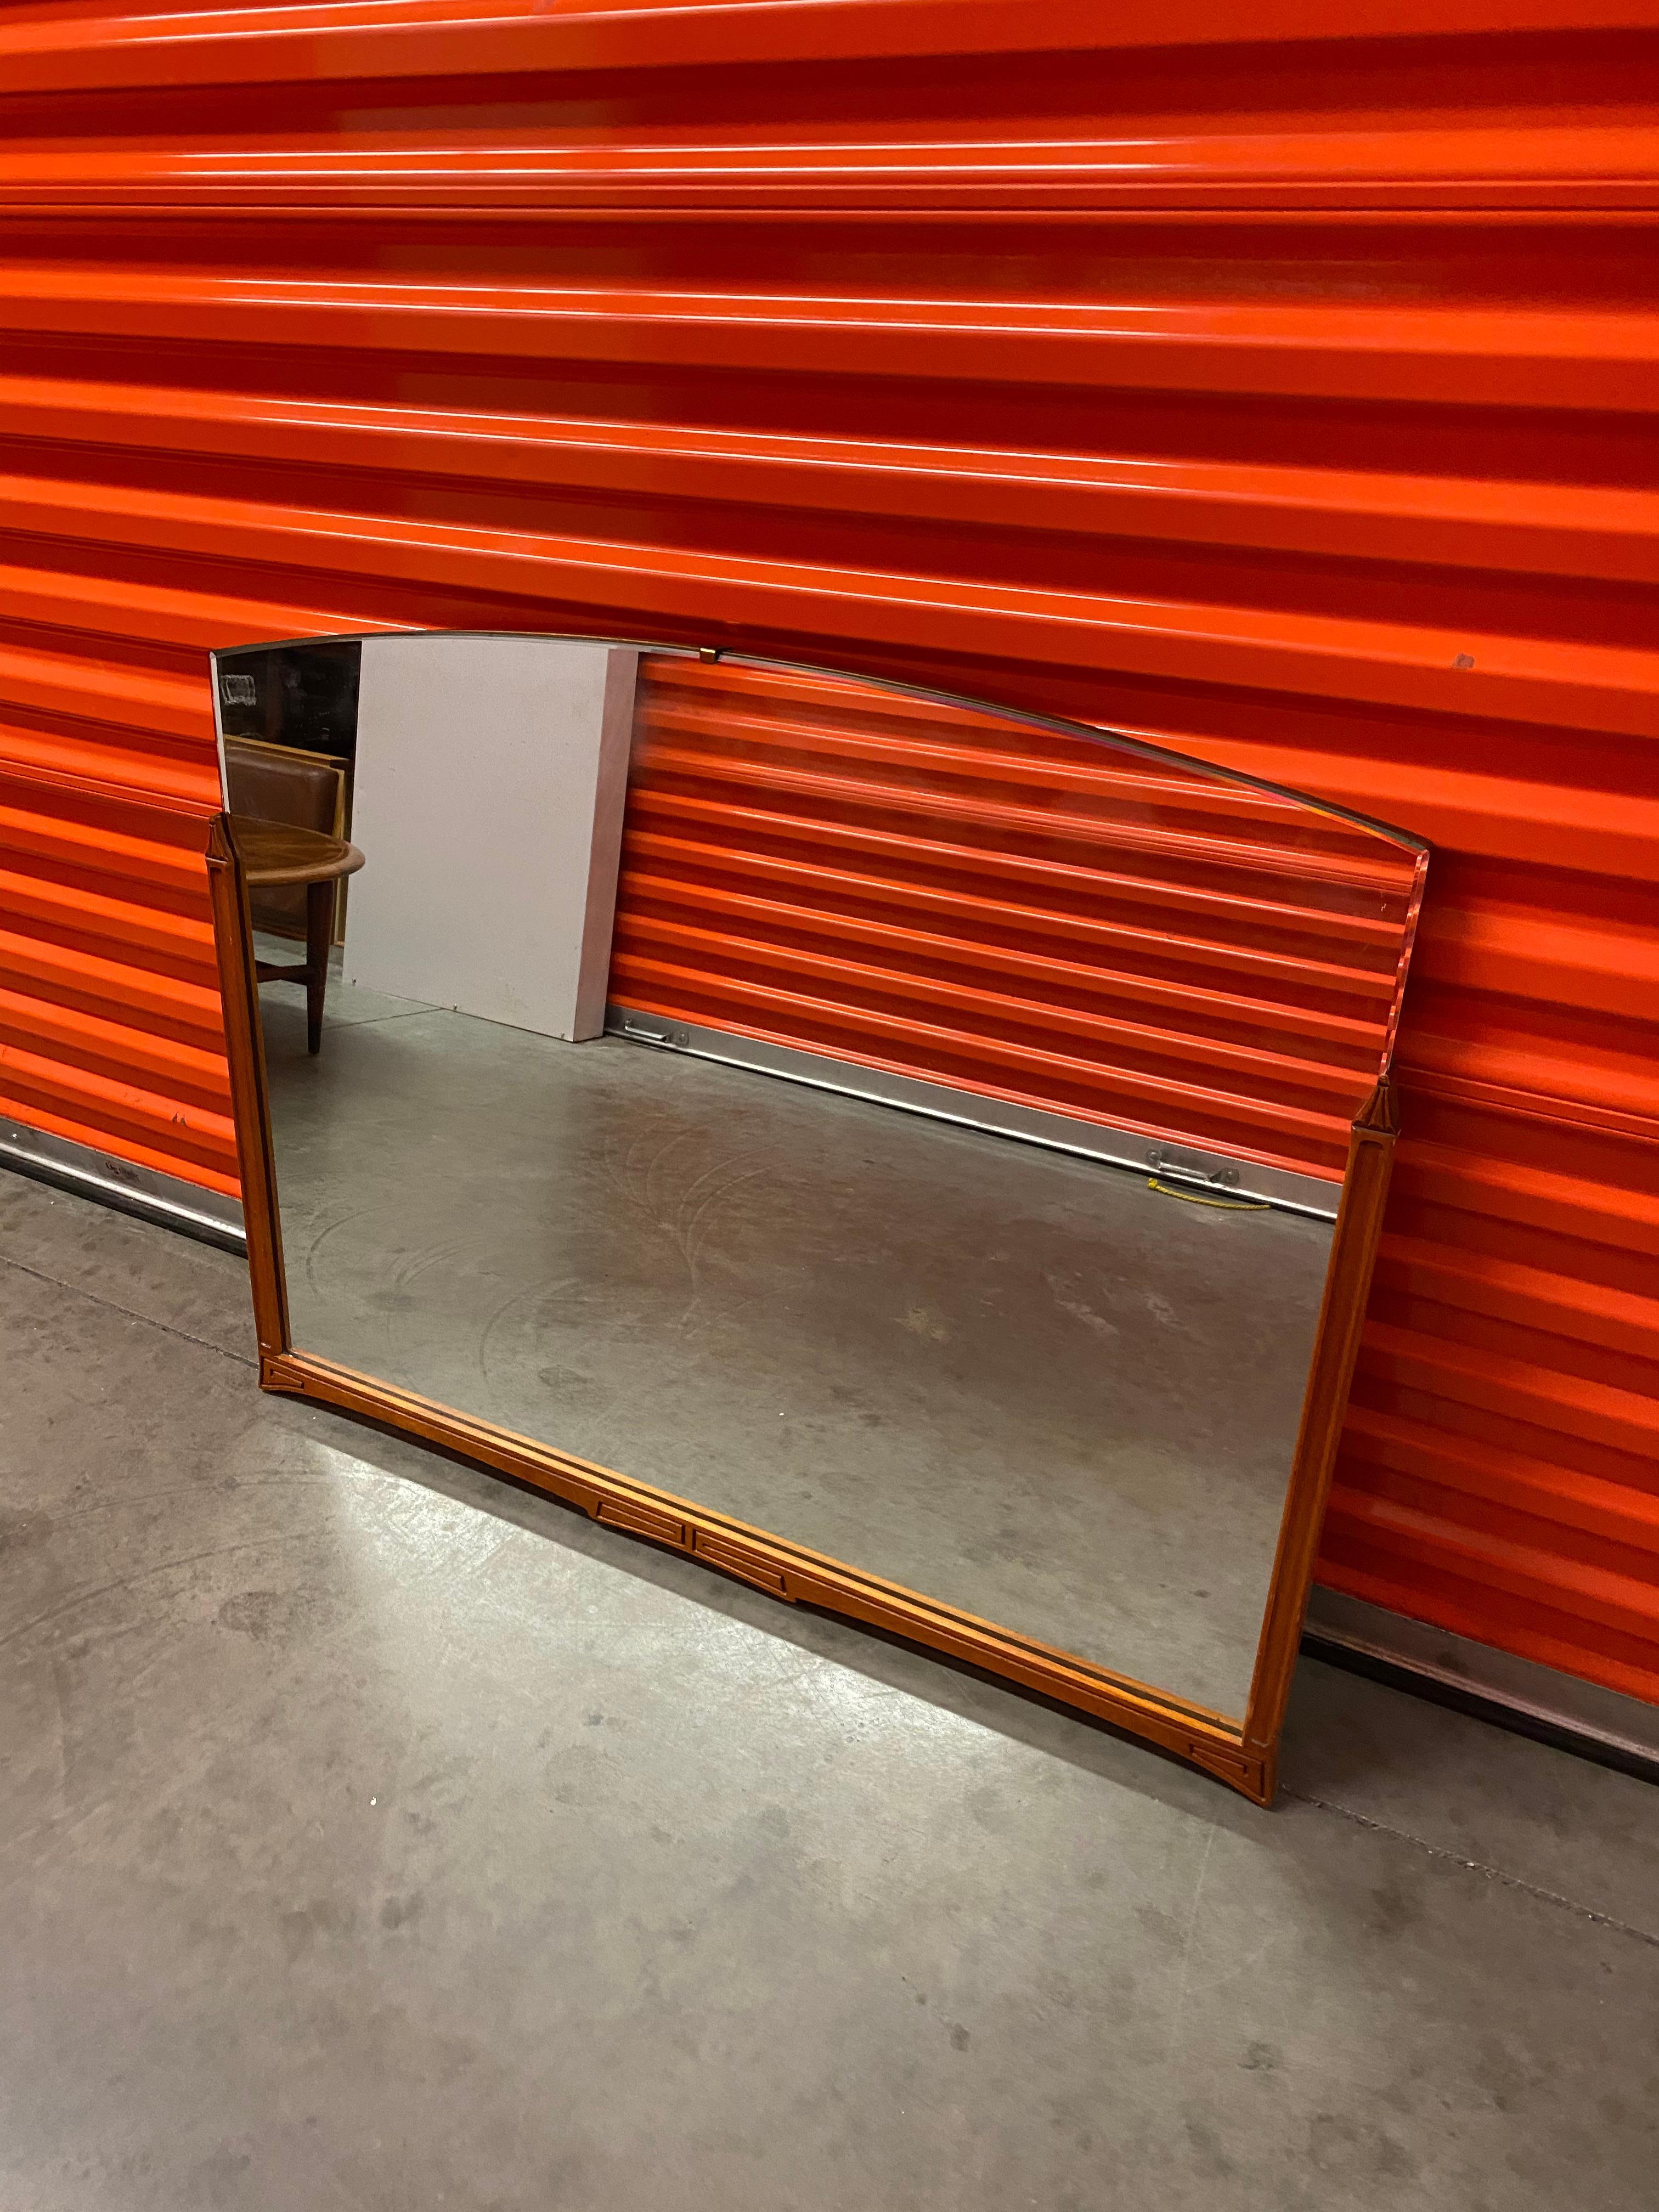 Mid-Century Modern rectangular wood wall mirror. Hanging wall mirror with exposed beveled edge at top and wood frame at lower portion. Simple decorative details at wood edges and frame give this piece its character.